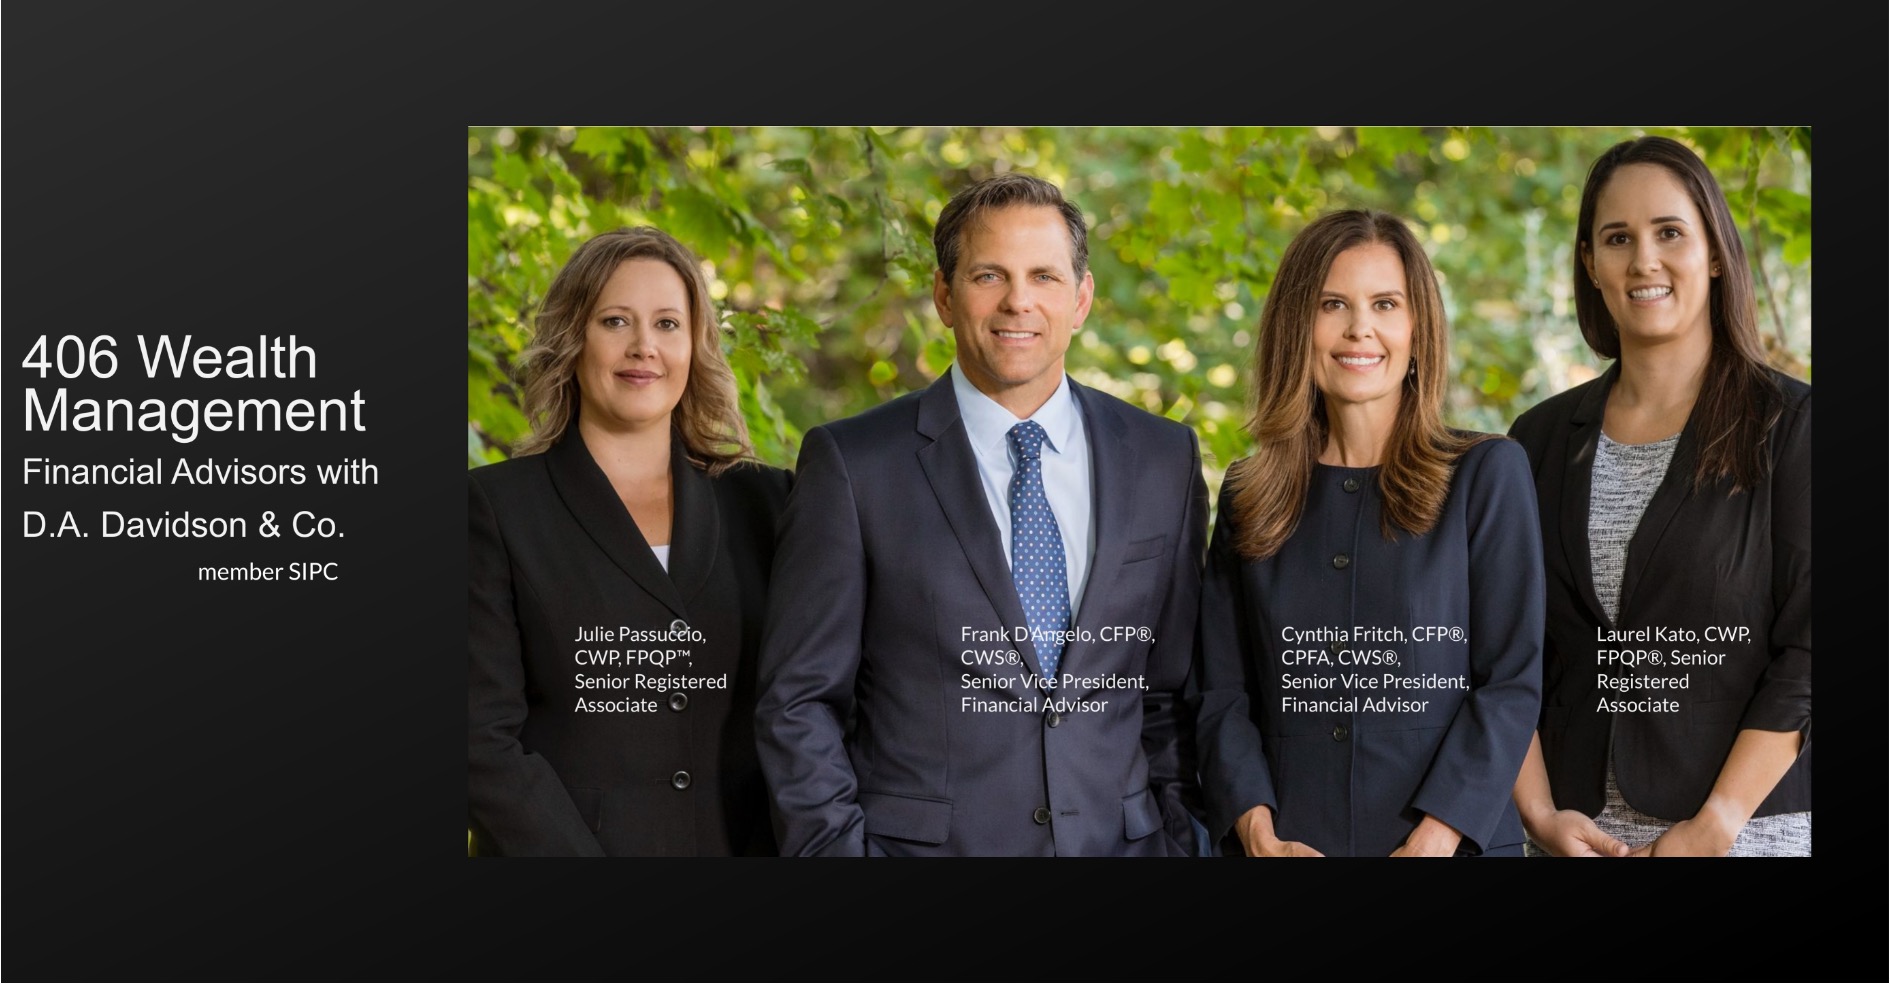 406 WEALTH MANAGEMENTFinancial Advisors with D.A. Davidson & Co.